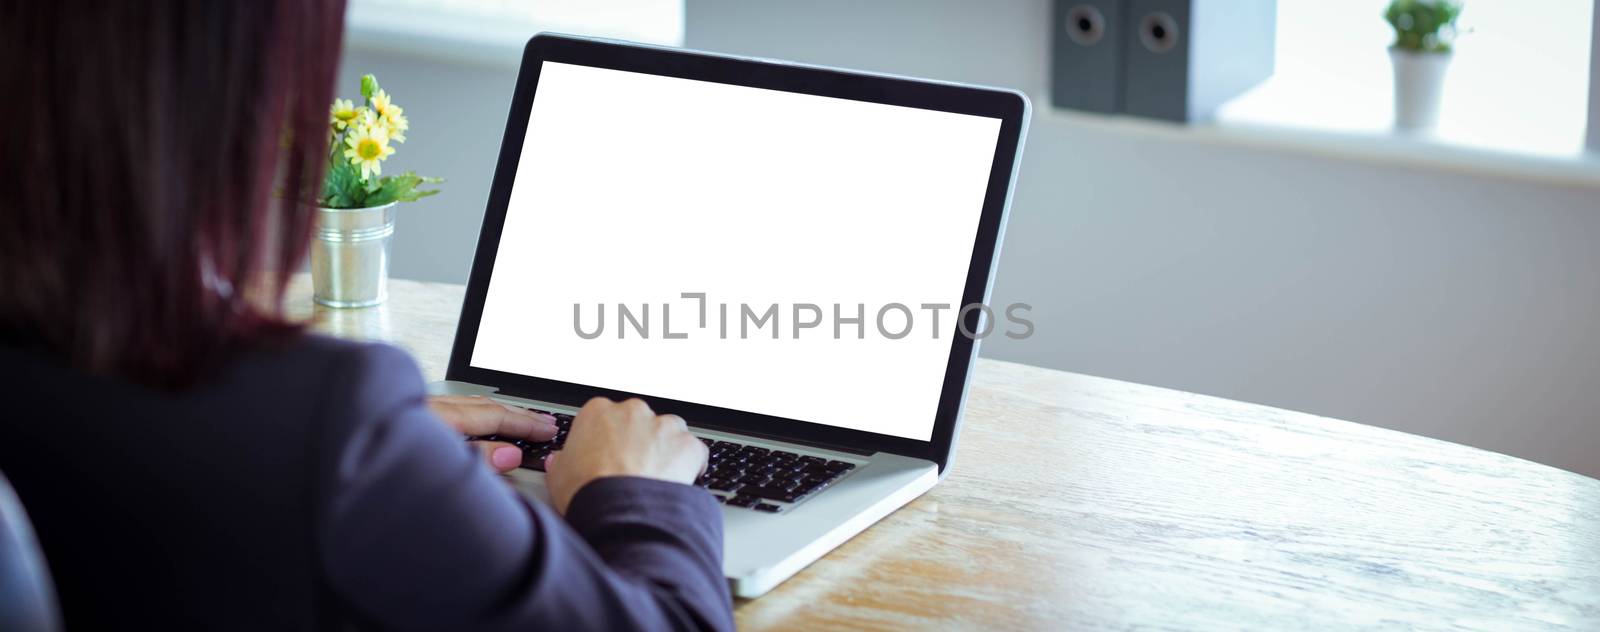 Businesswoman working at her desk on laptop in her office